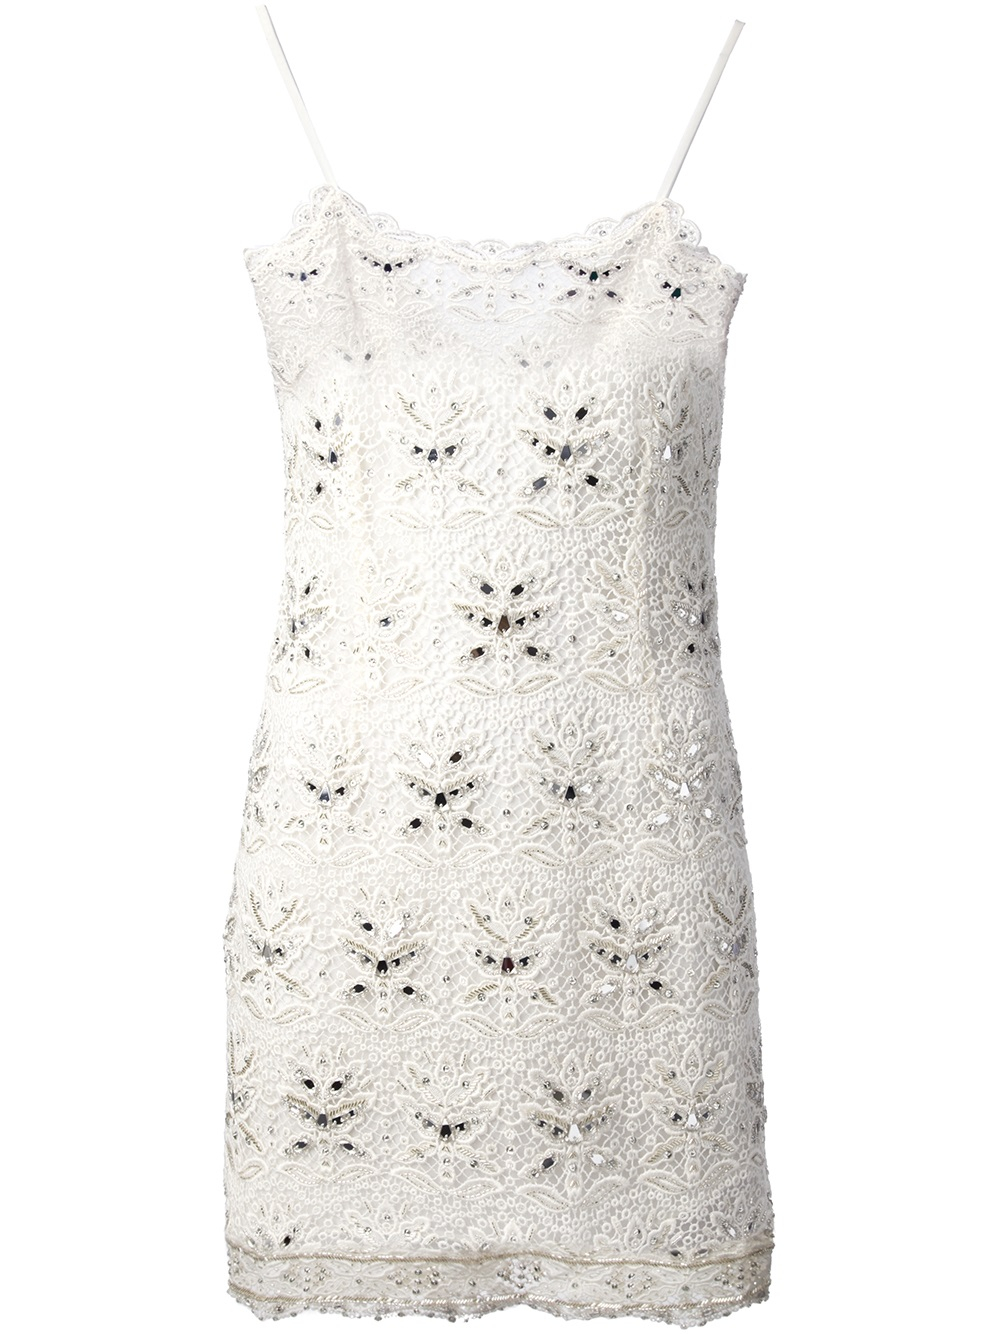 Lyst - Emilio pucci Embellished Crochet Dress in White